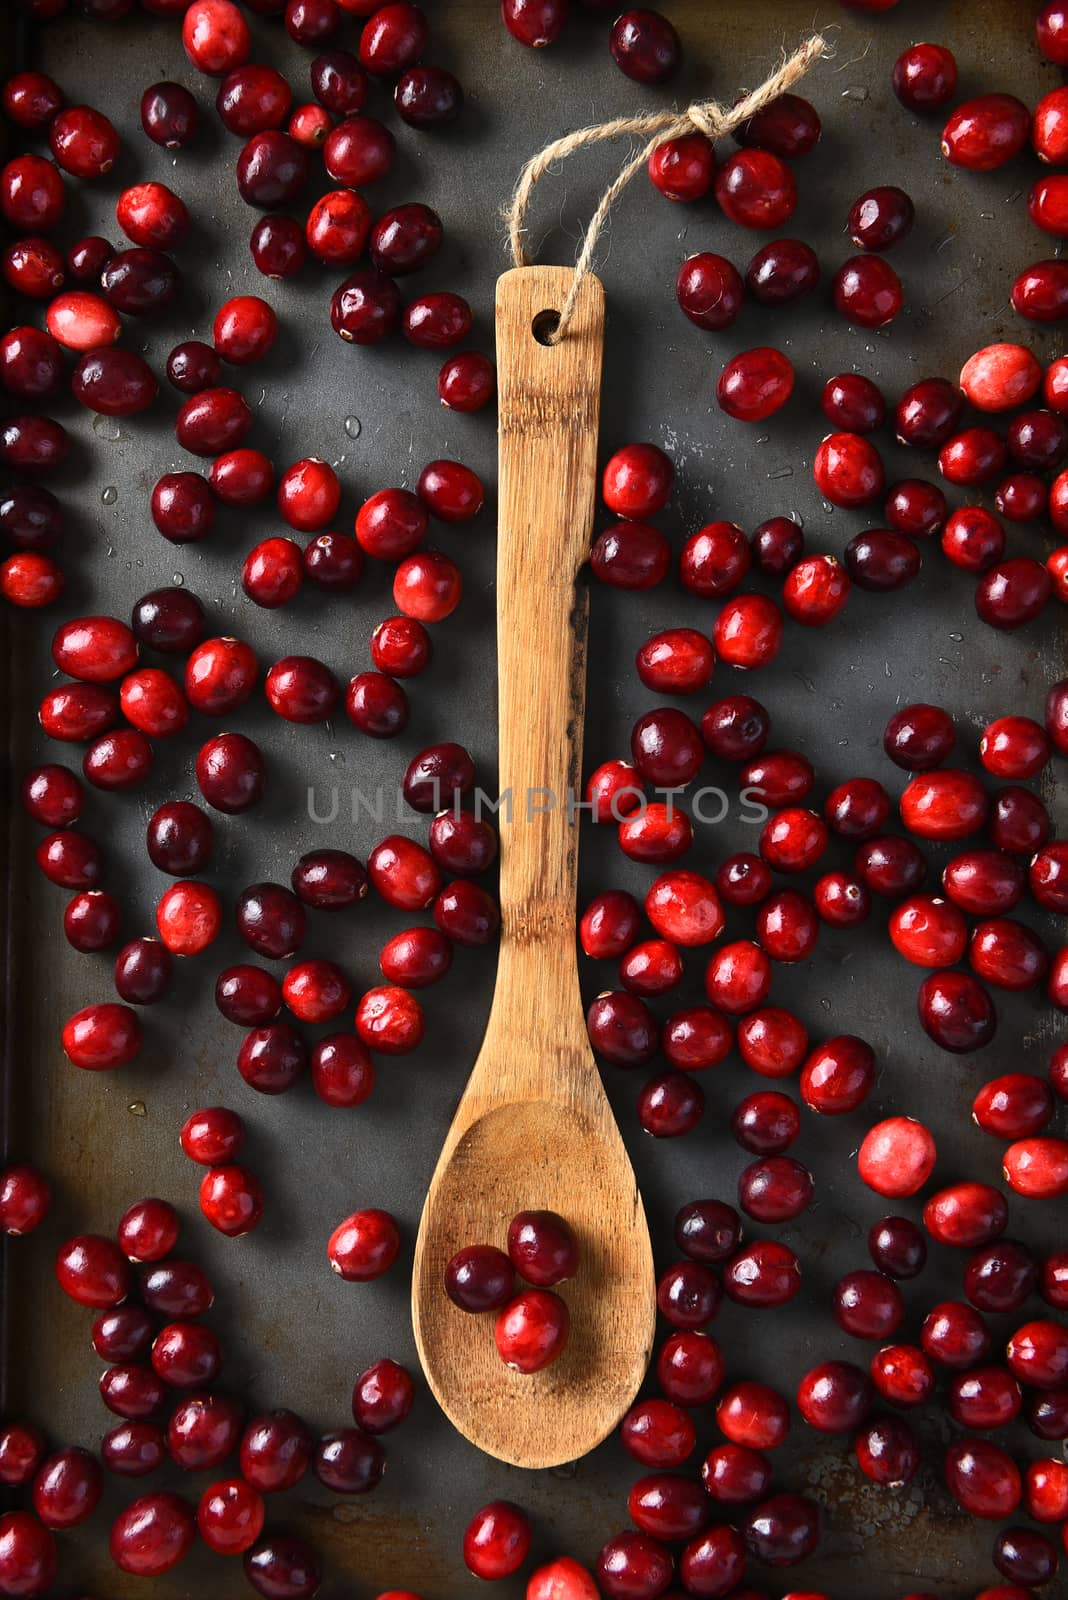 Overhead view of fresh cranberries and a wooden spoon. Vertical format. 